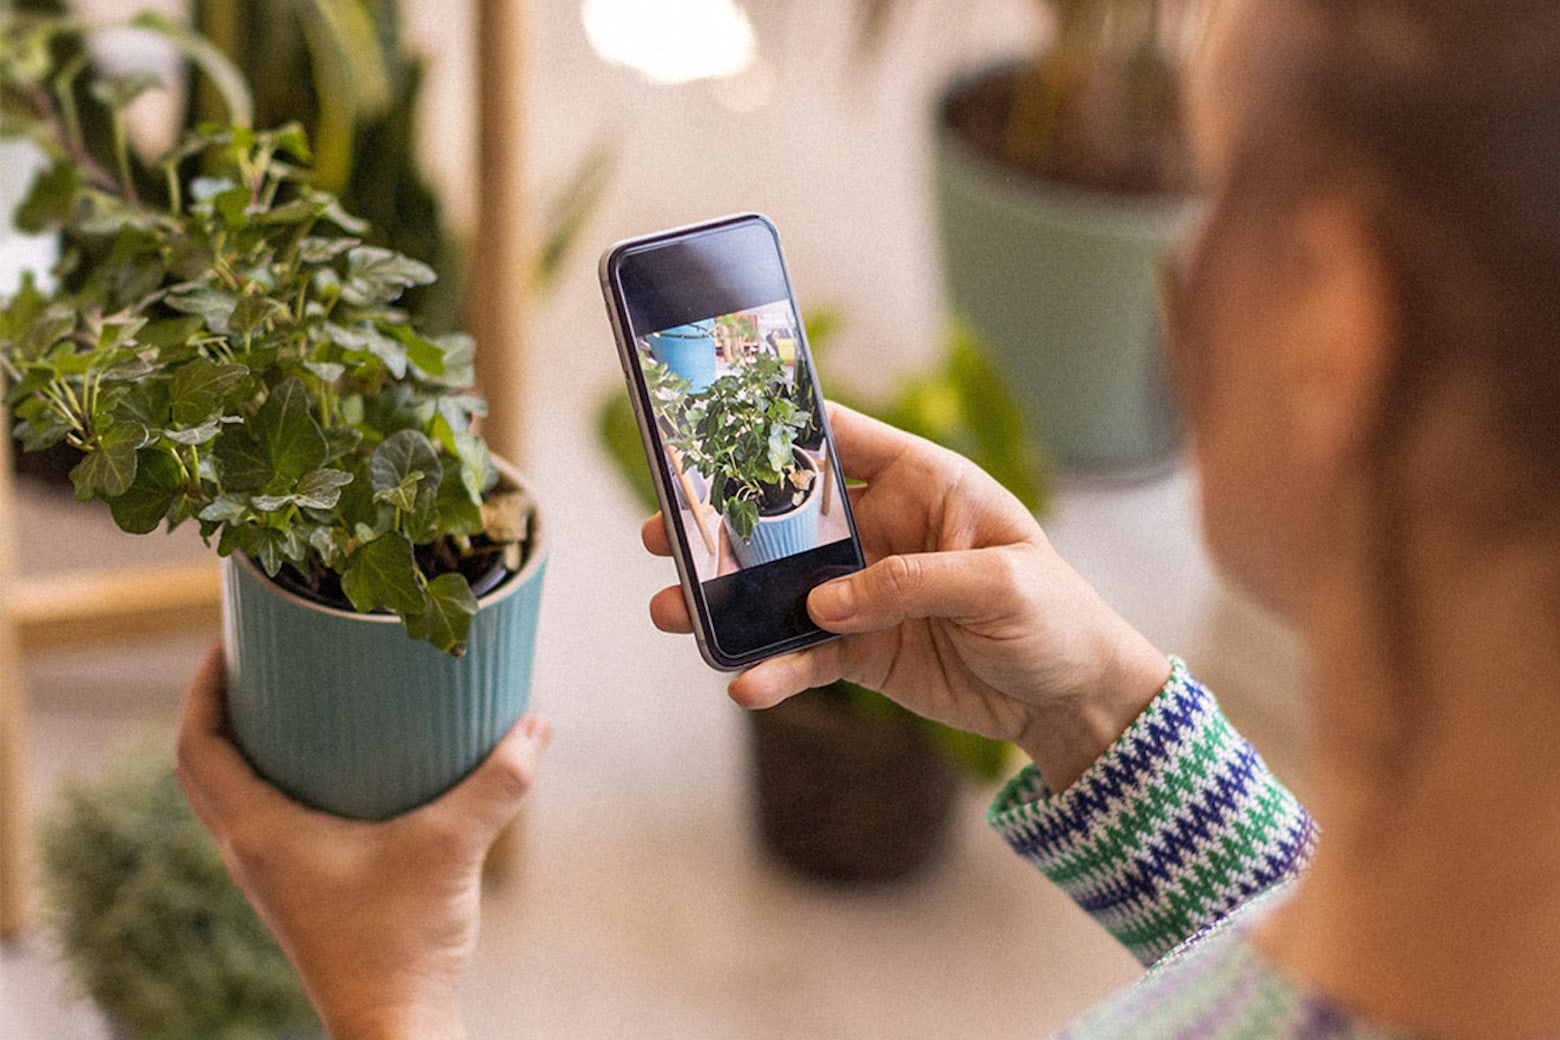 Home and garden deals for iPhone users will make your summer fun